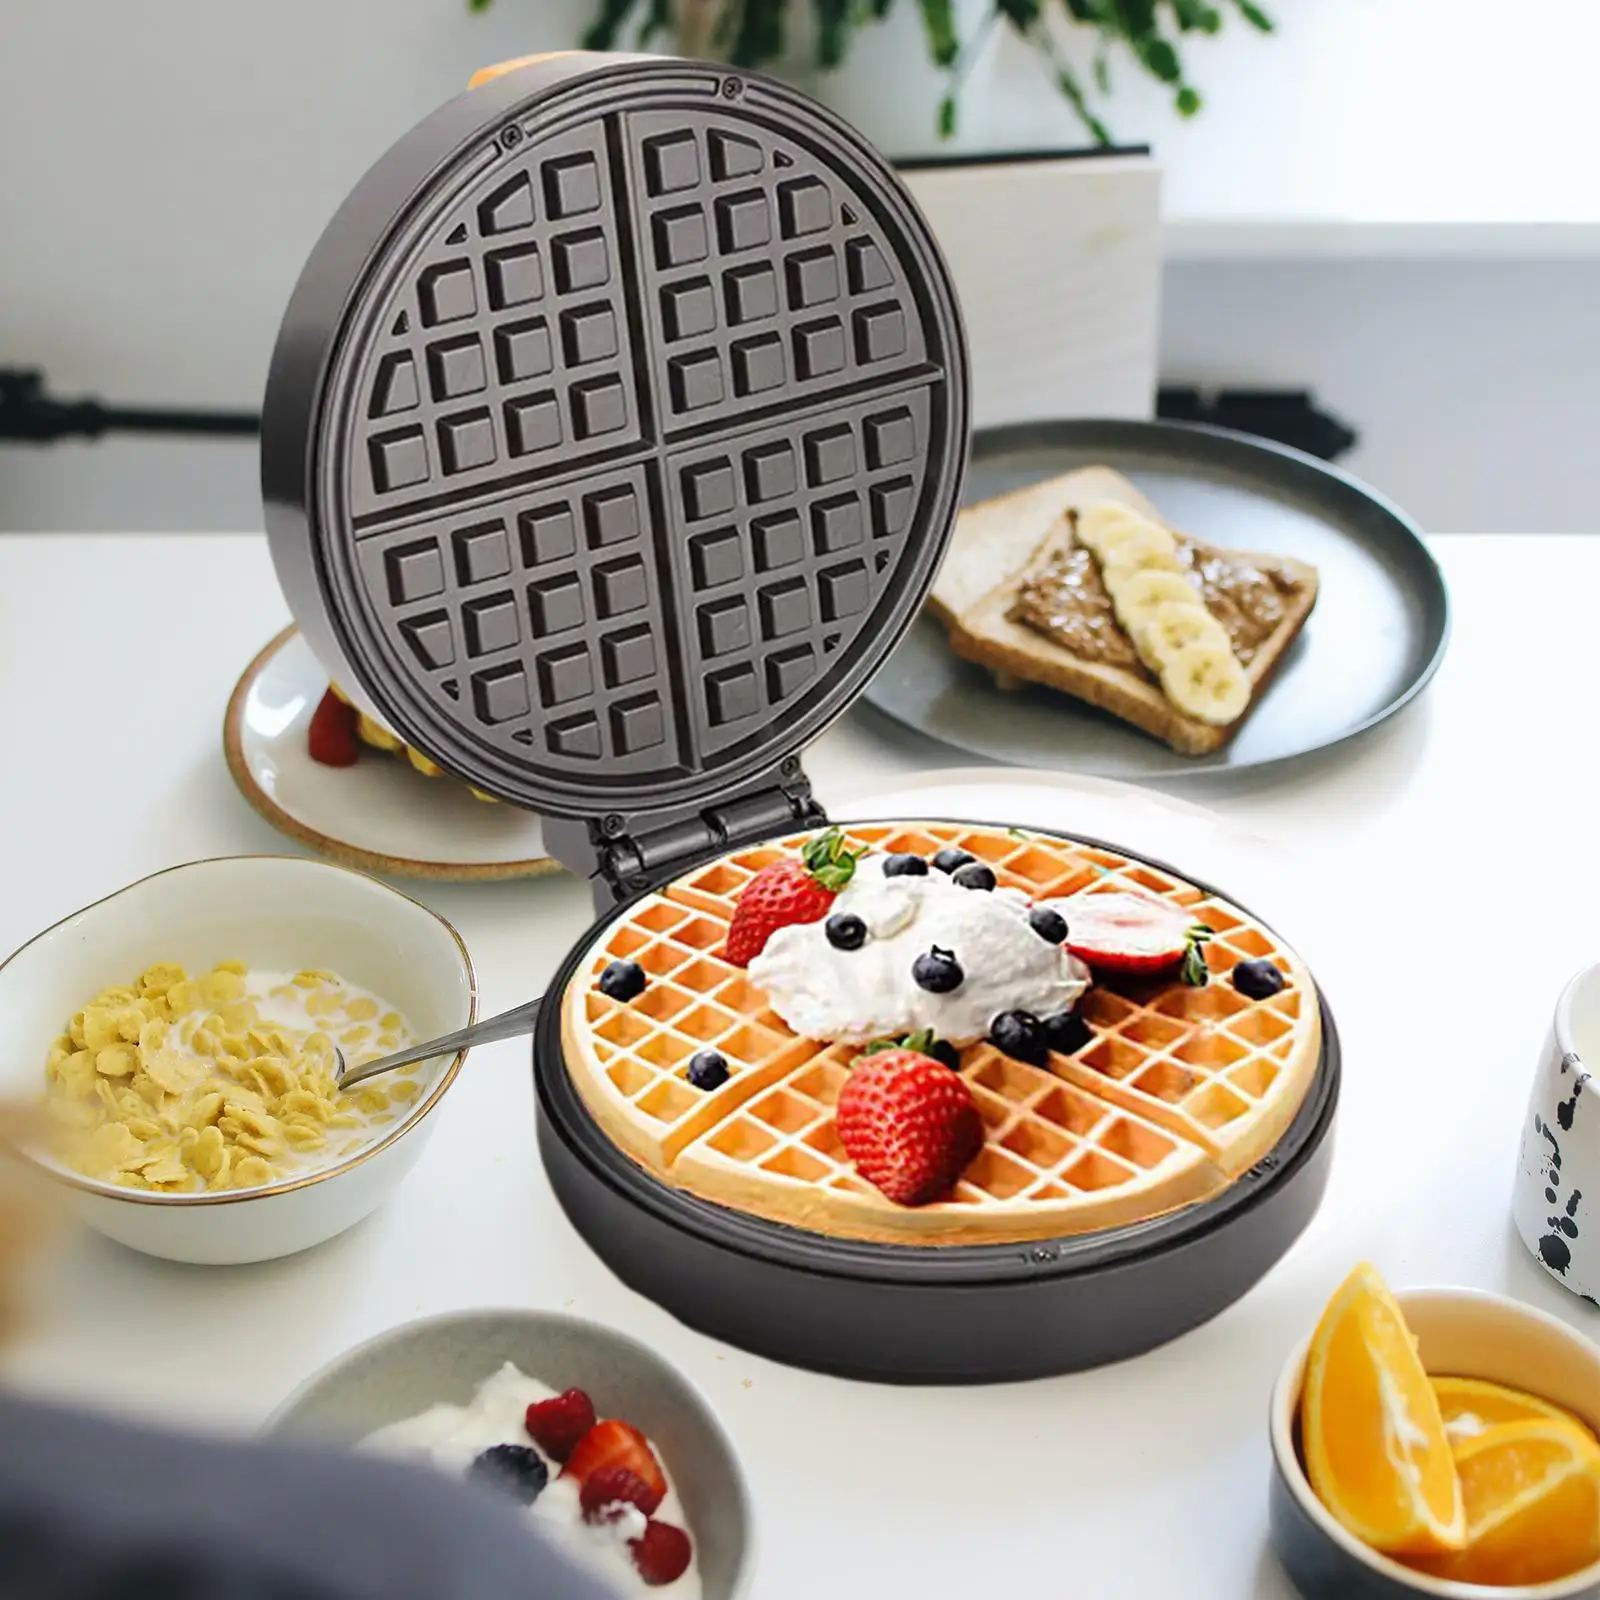 Cooking Plates Multifunctional Anti Scald Handle LED Display US Adapter Portable Waffle Maker for cinnamons Roll Cupcake Oatmeal